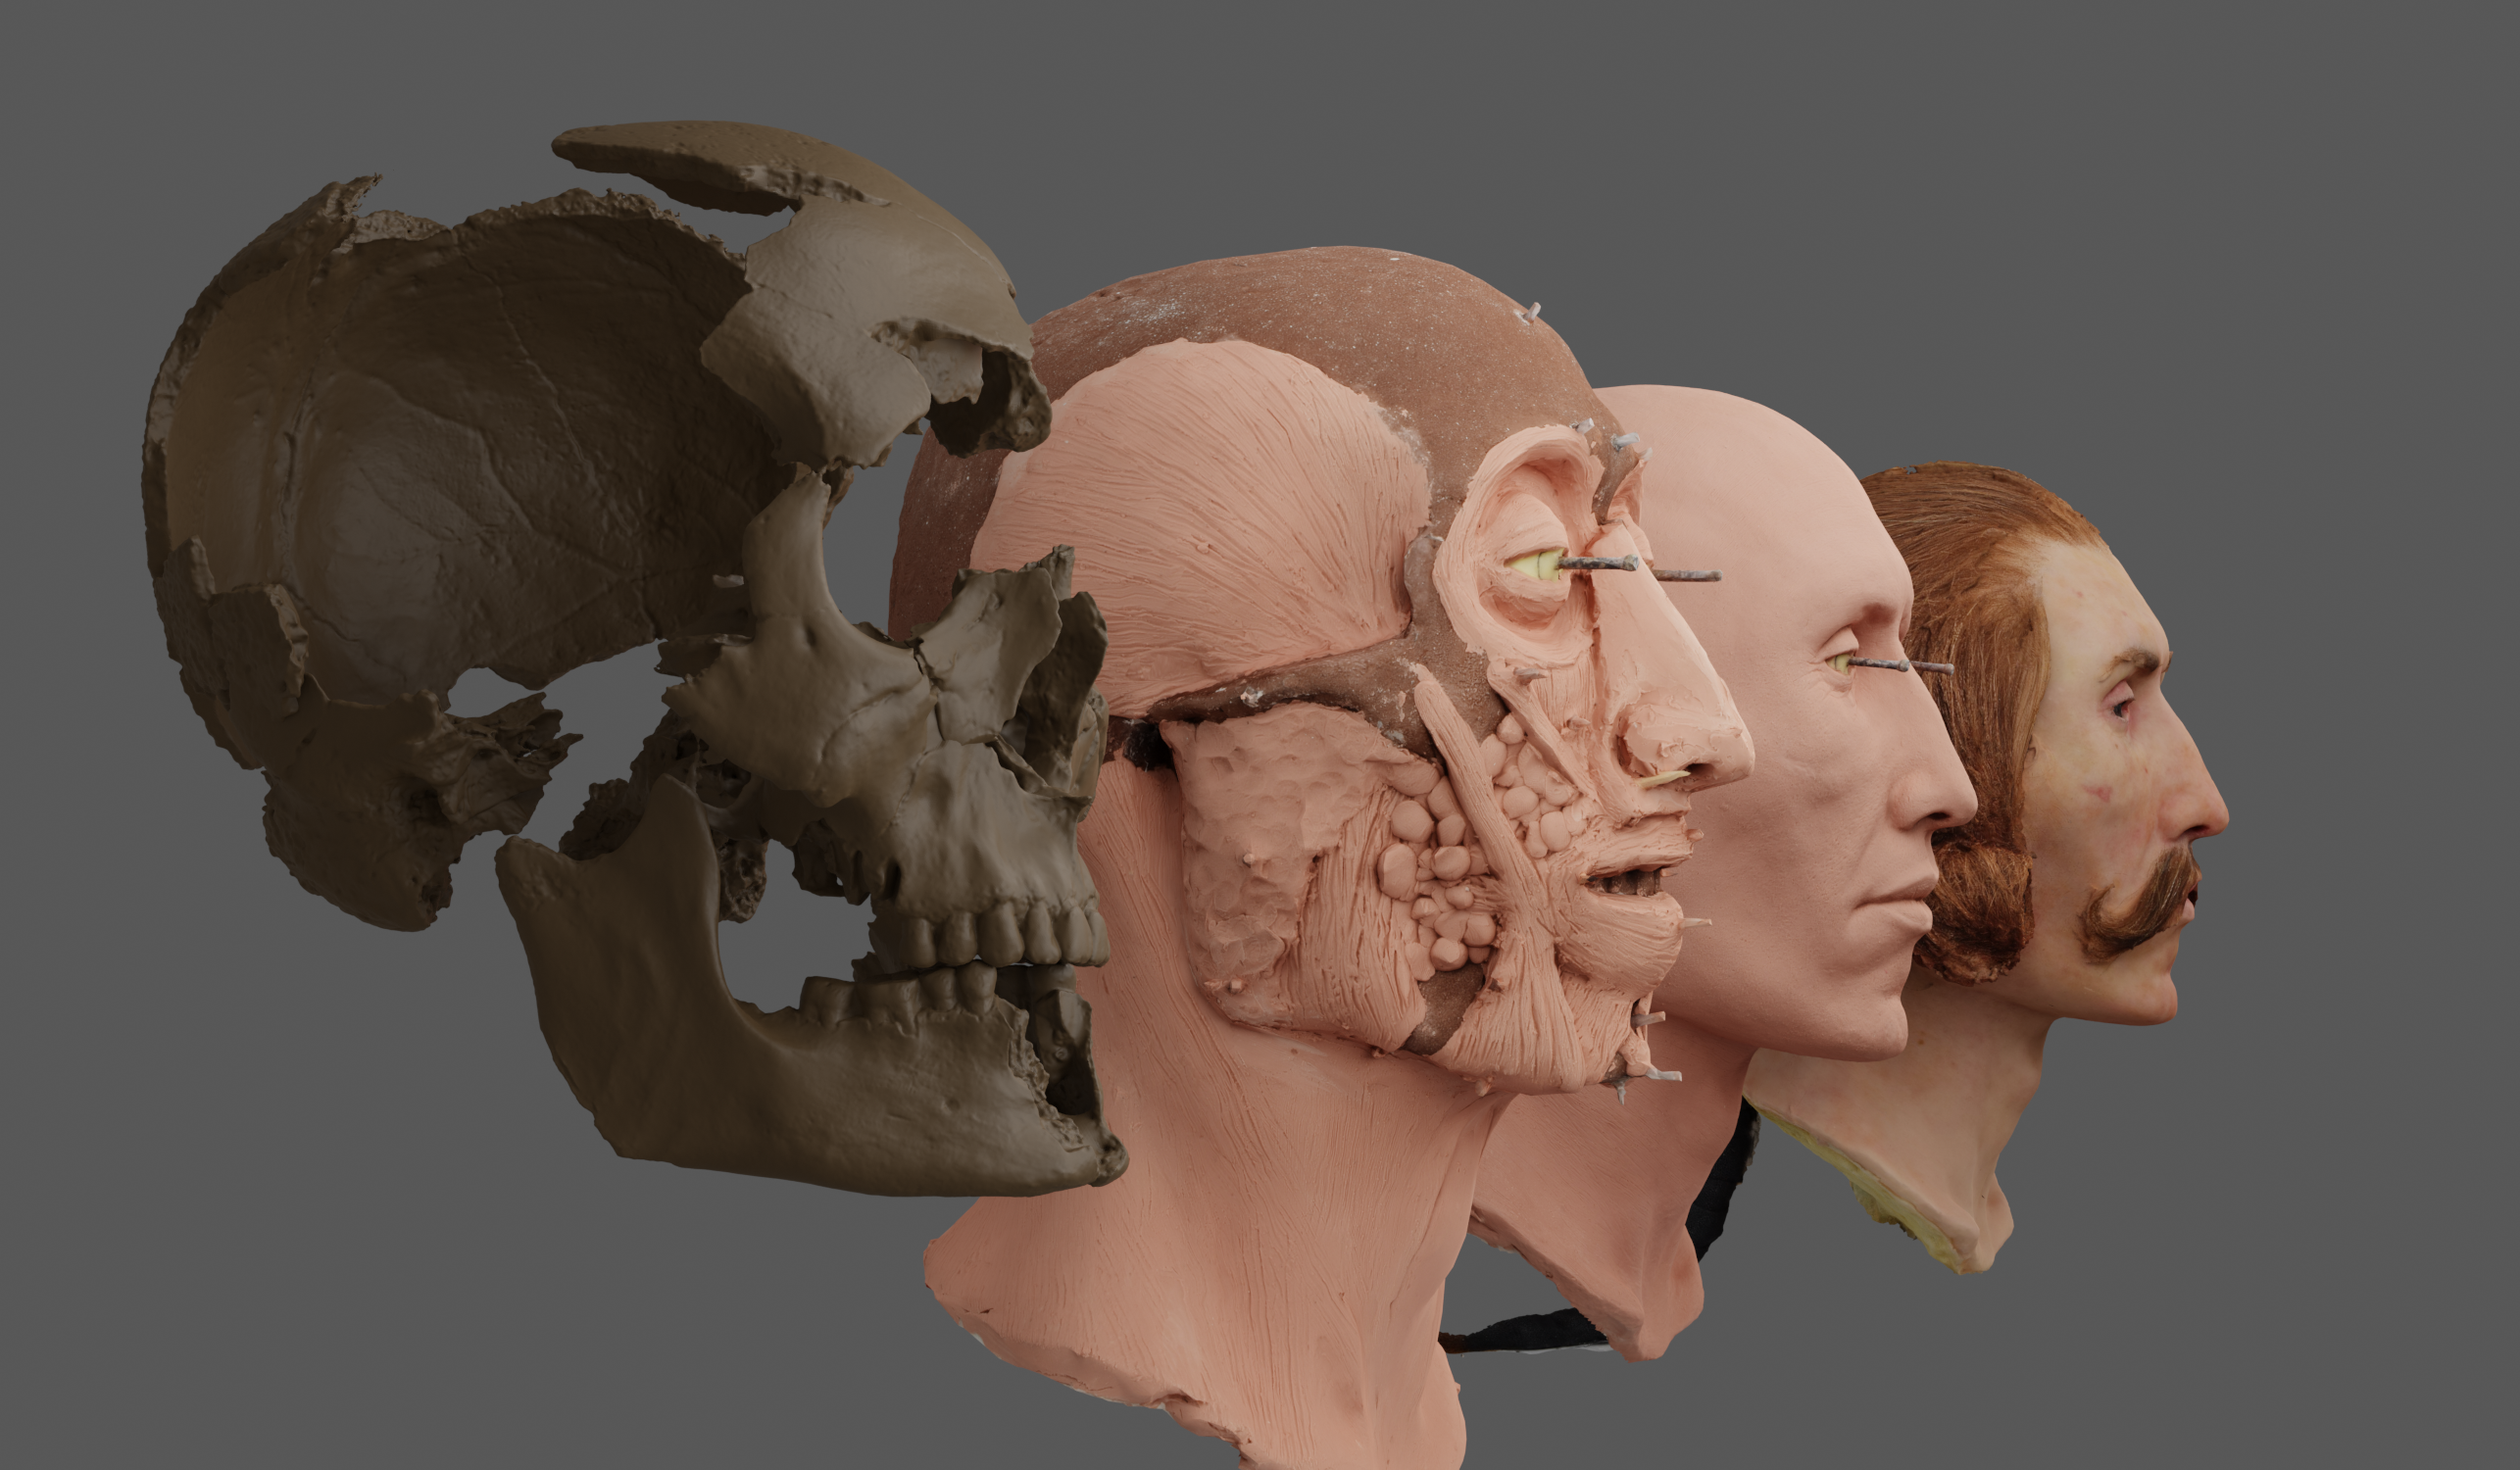 Visualizing the process of facial reconstruction in AR